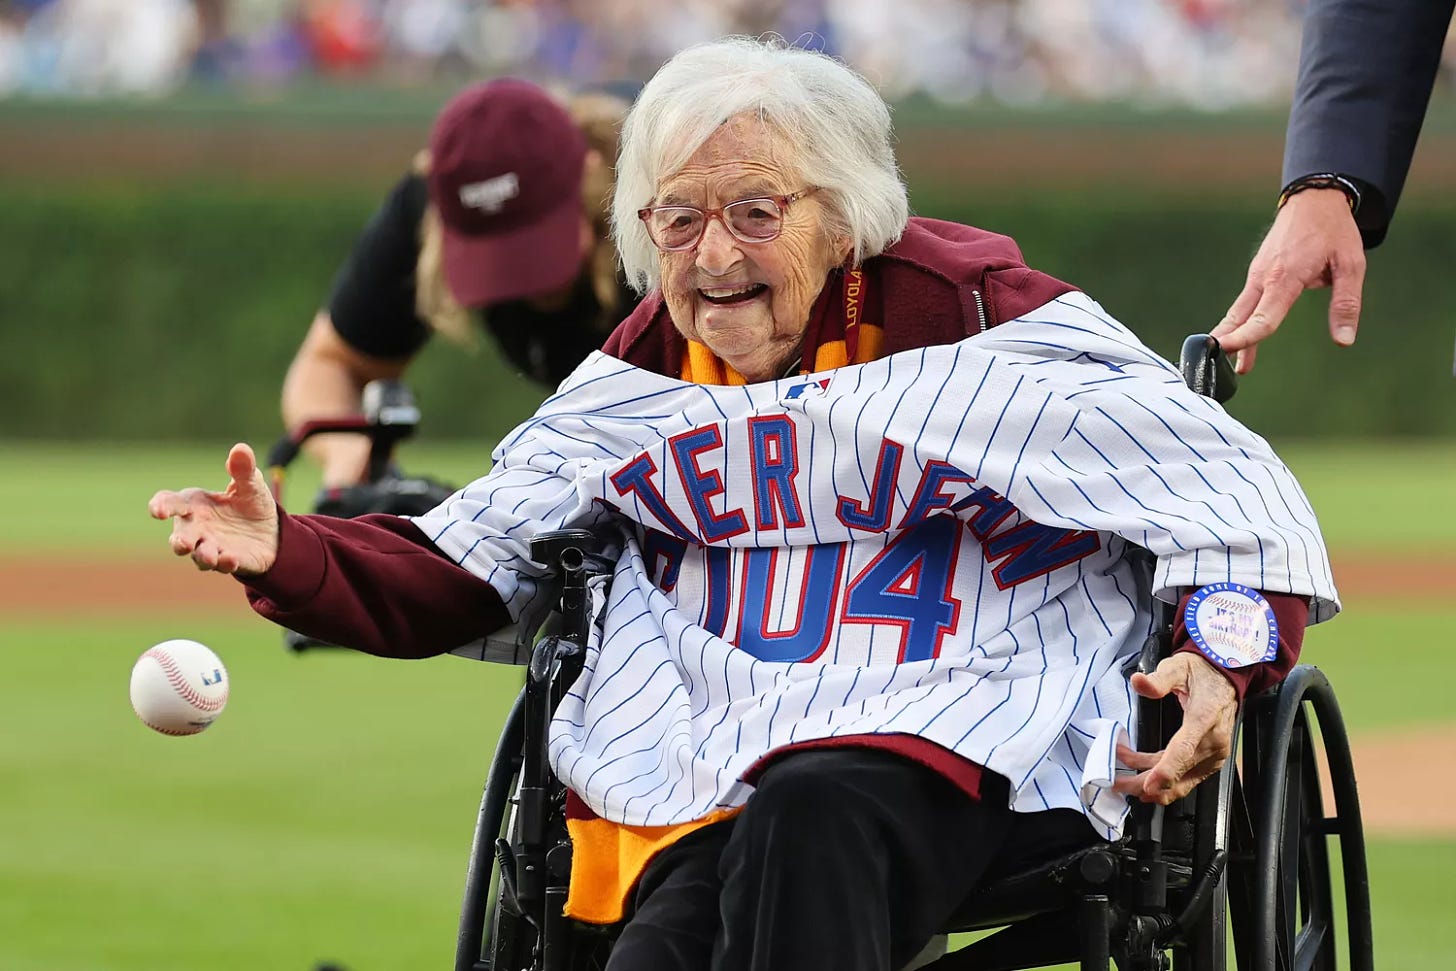 Jean Dolores Schmidt, also known as Sister Jean, throws out the first pitch prior to the game between the Chicago Cubs and the Milwaukee Brewers at Wrigley Field on August 28, 2023 in Chicago, Illinois.